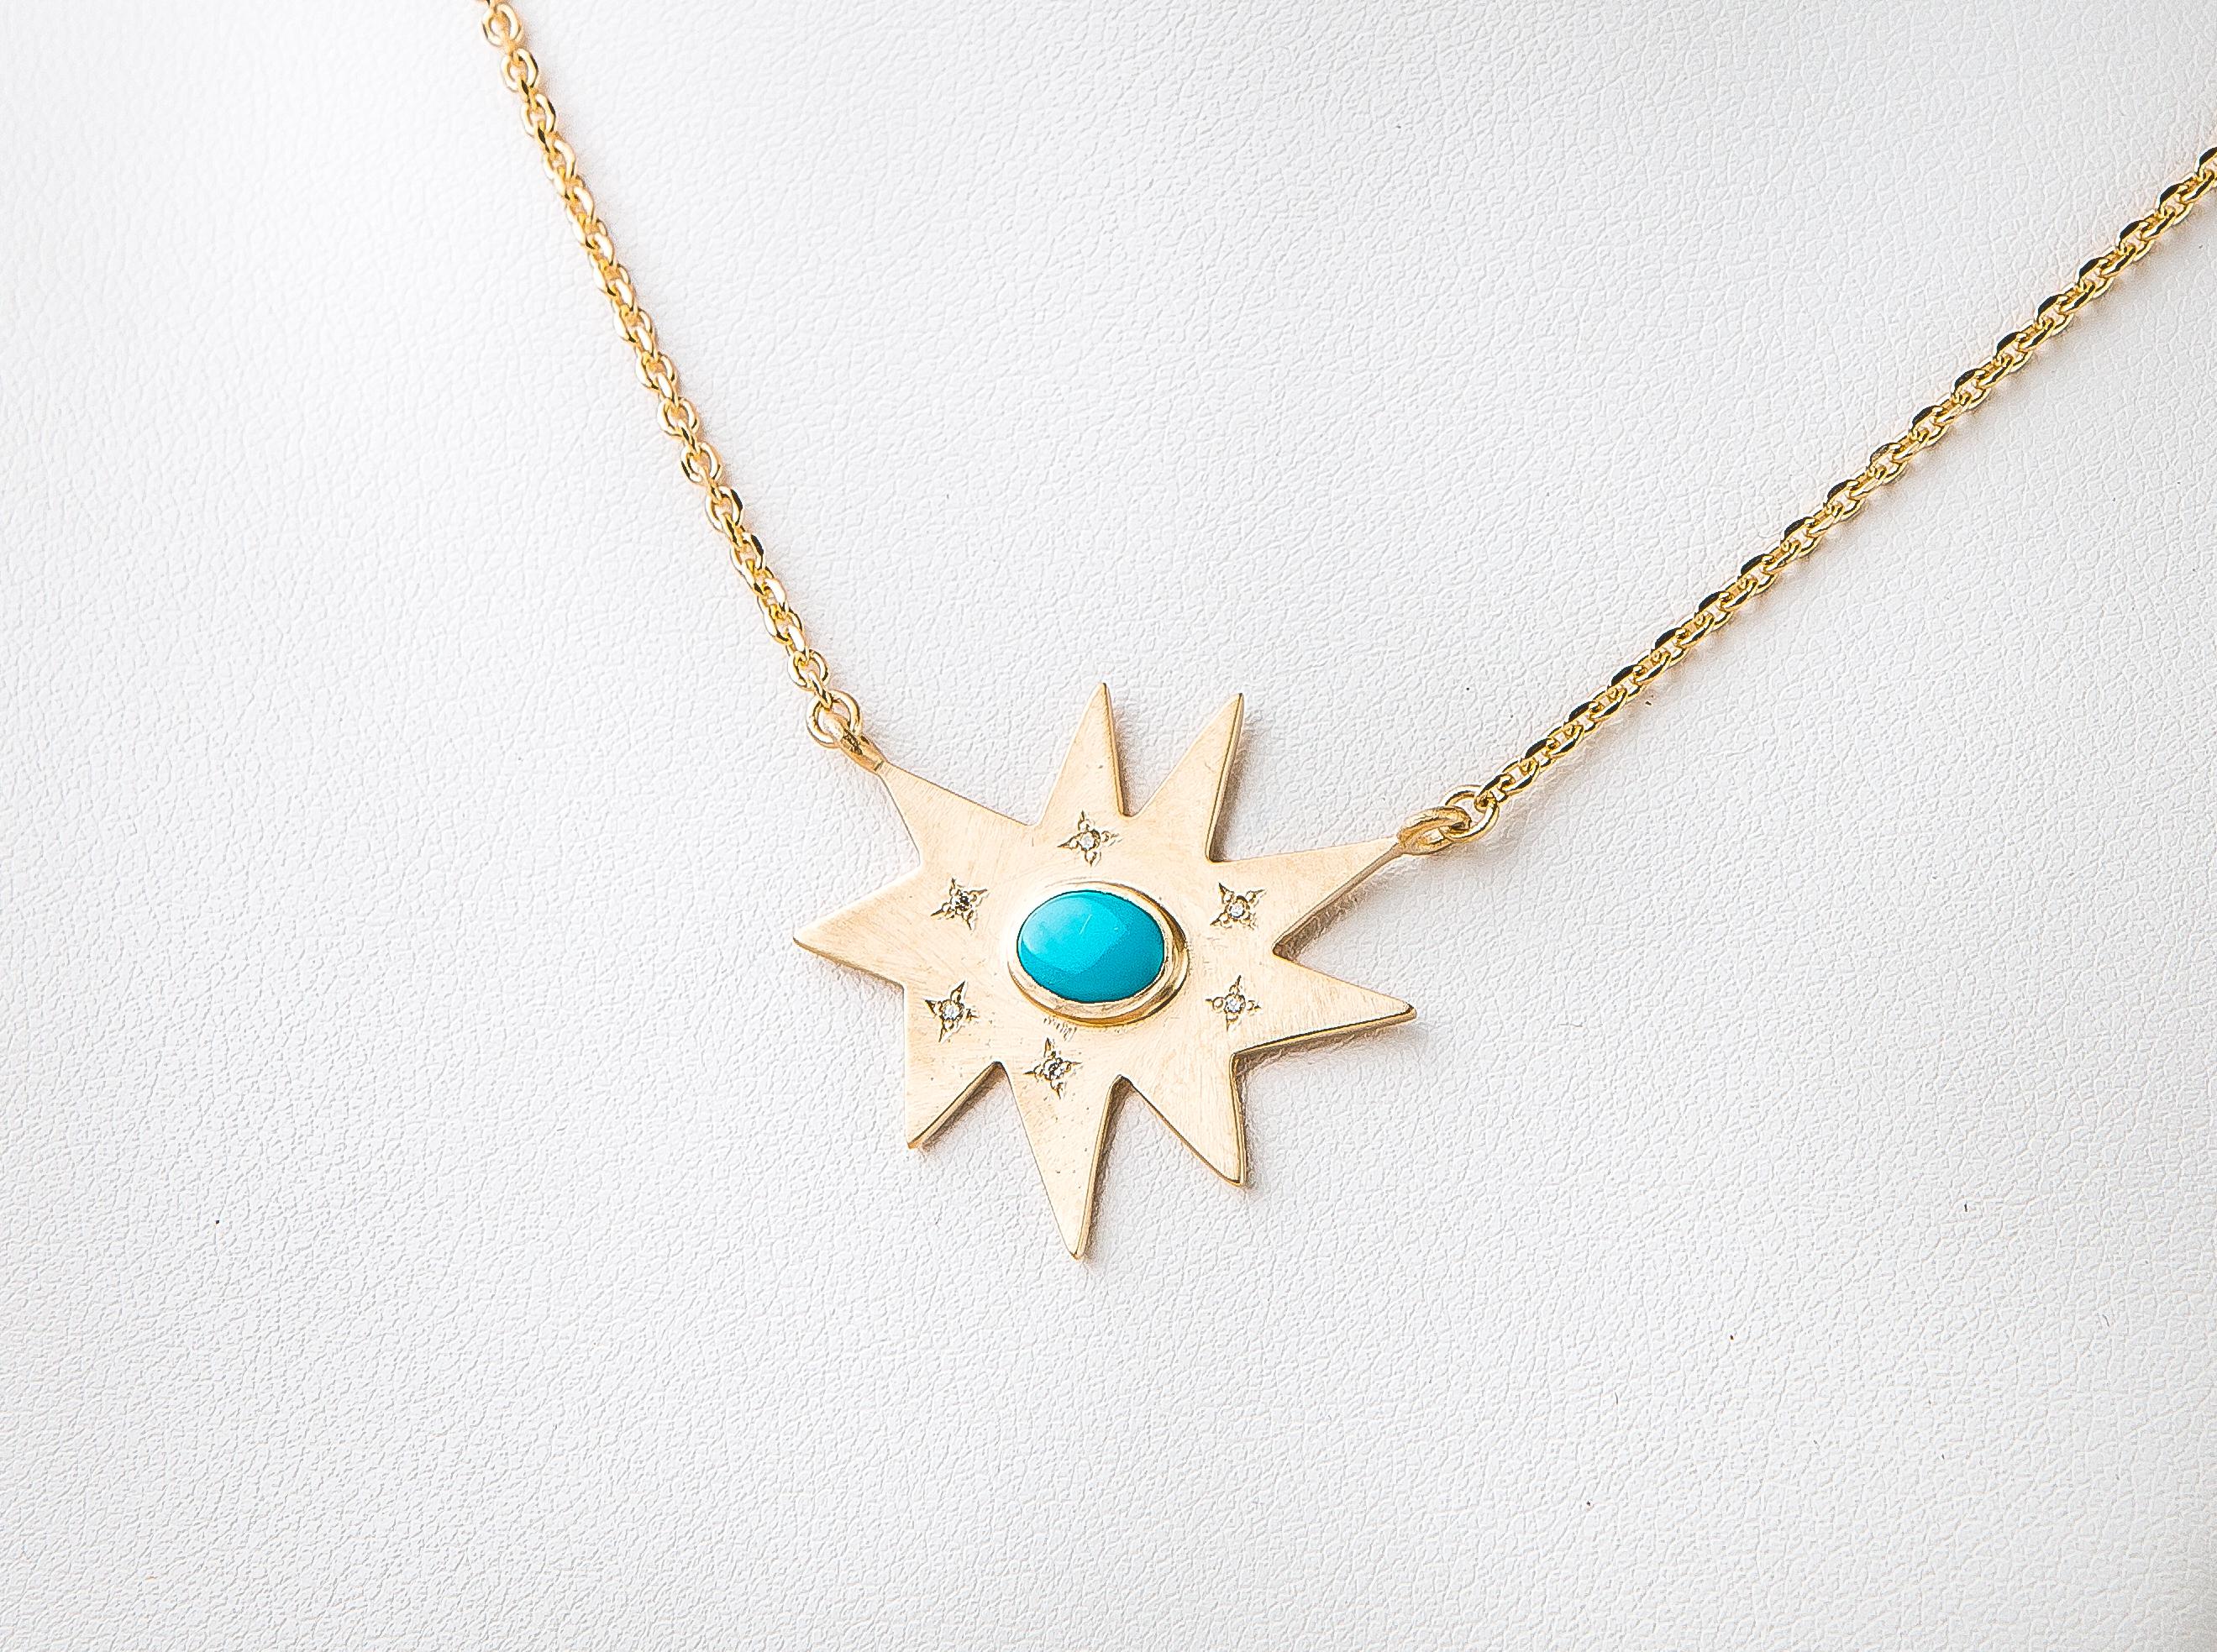 Classic and stunning. Our iconic matte gold organic star shape Stella necklace features our signature diamond dusting and a vibrant turquoise center. Hanging on a substantial gold chain, this colorful piece is luxe and weighty. Perfect to wear alone